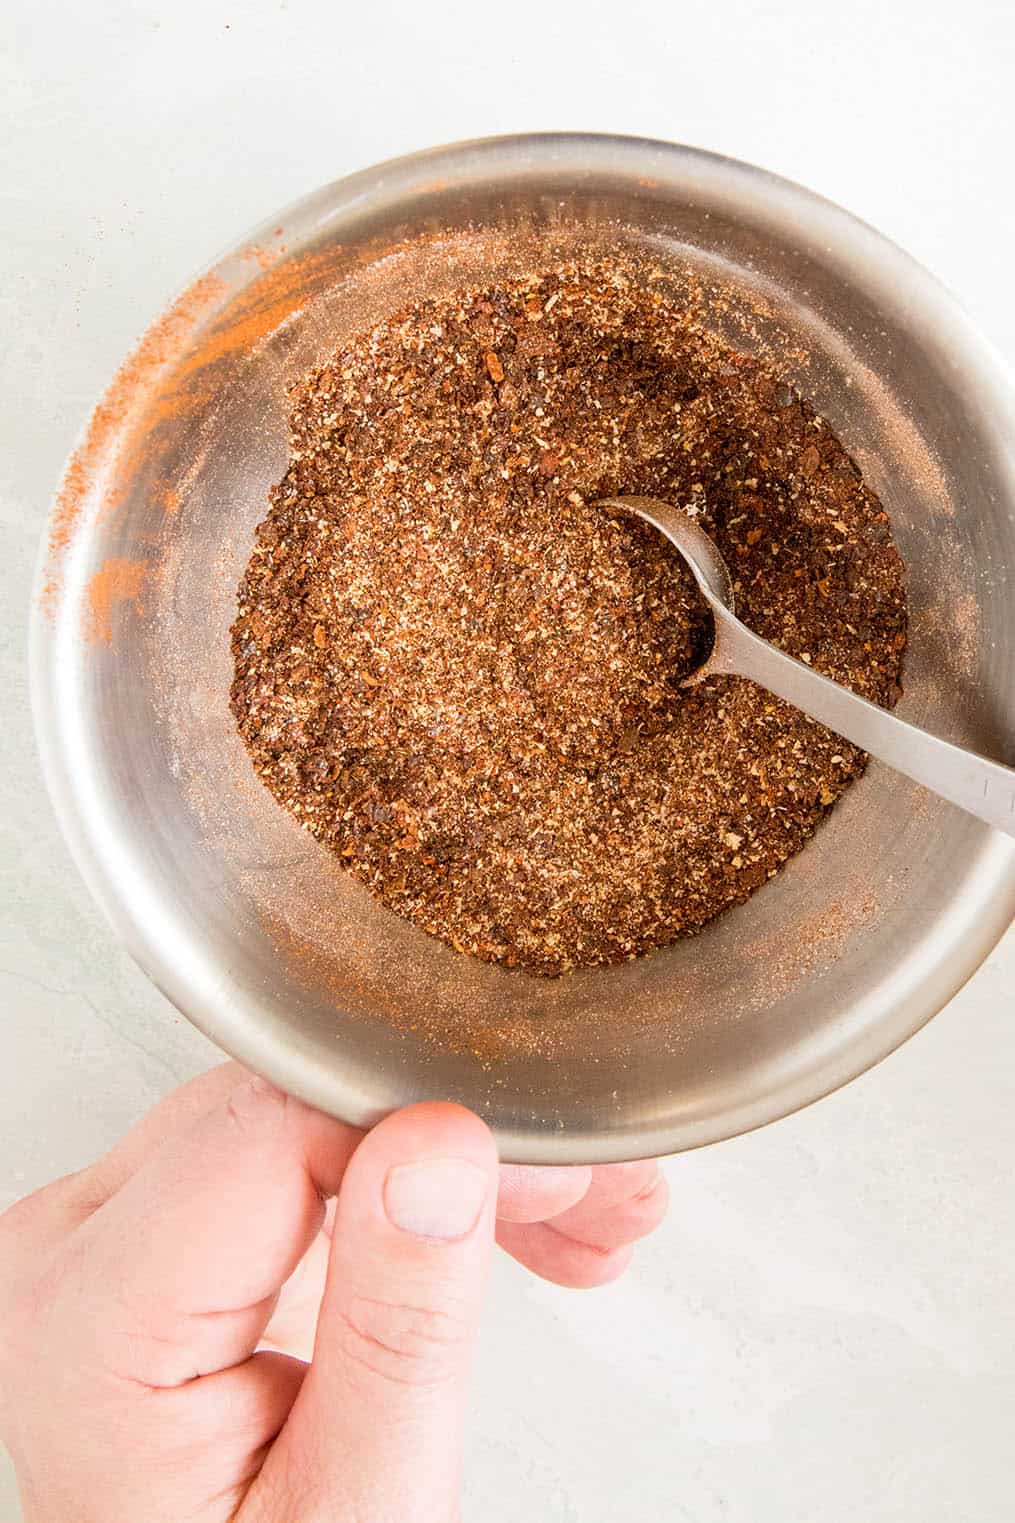 Mixing the Homemade Chili Powder in a bowl